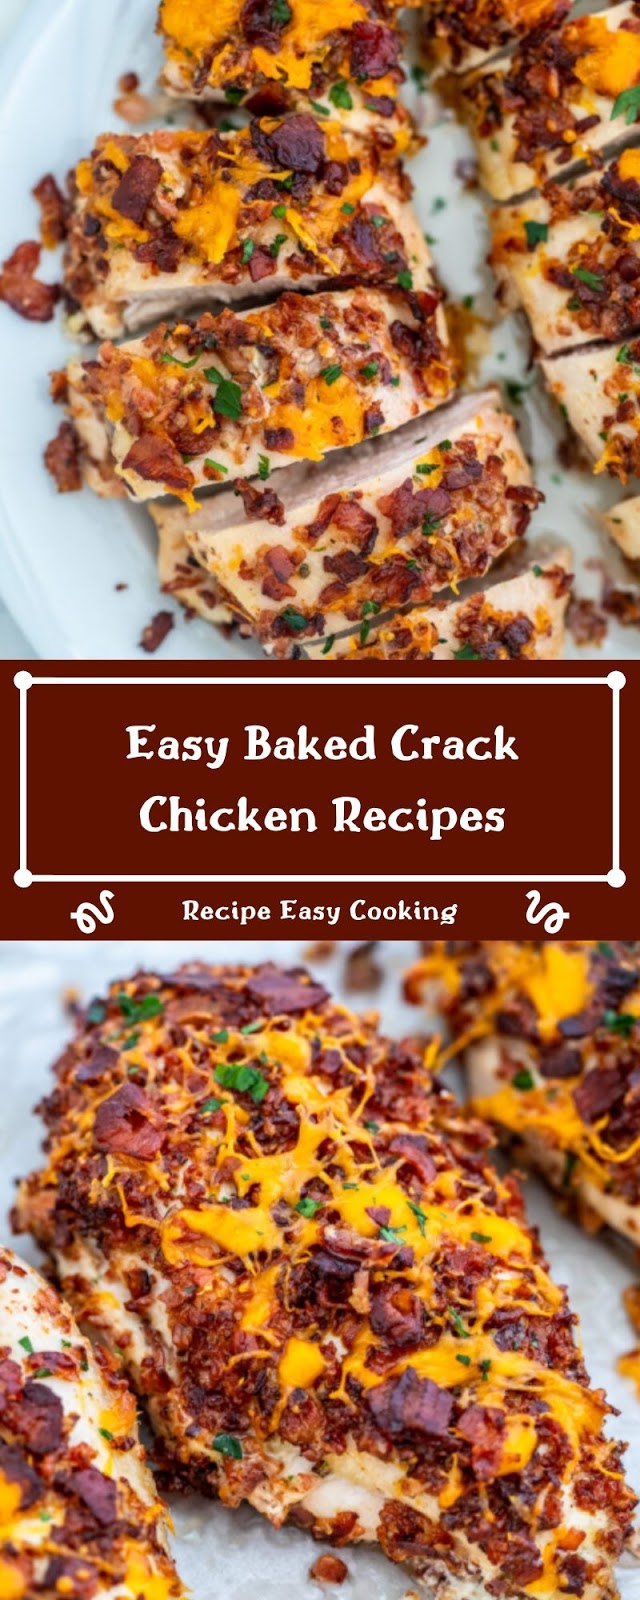 Easy Baked Crack Chicken Recipes - Recipes Easy Cooking